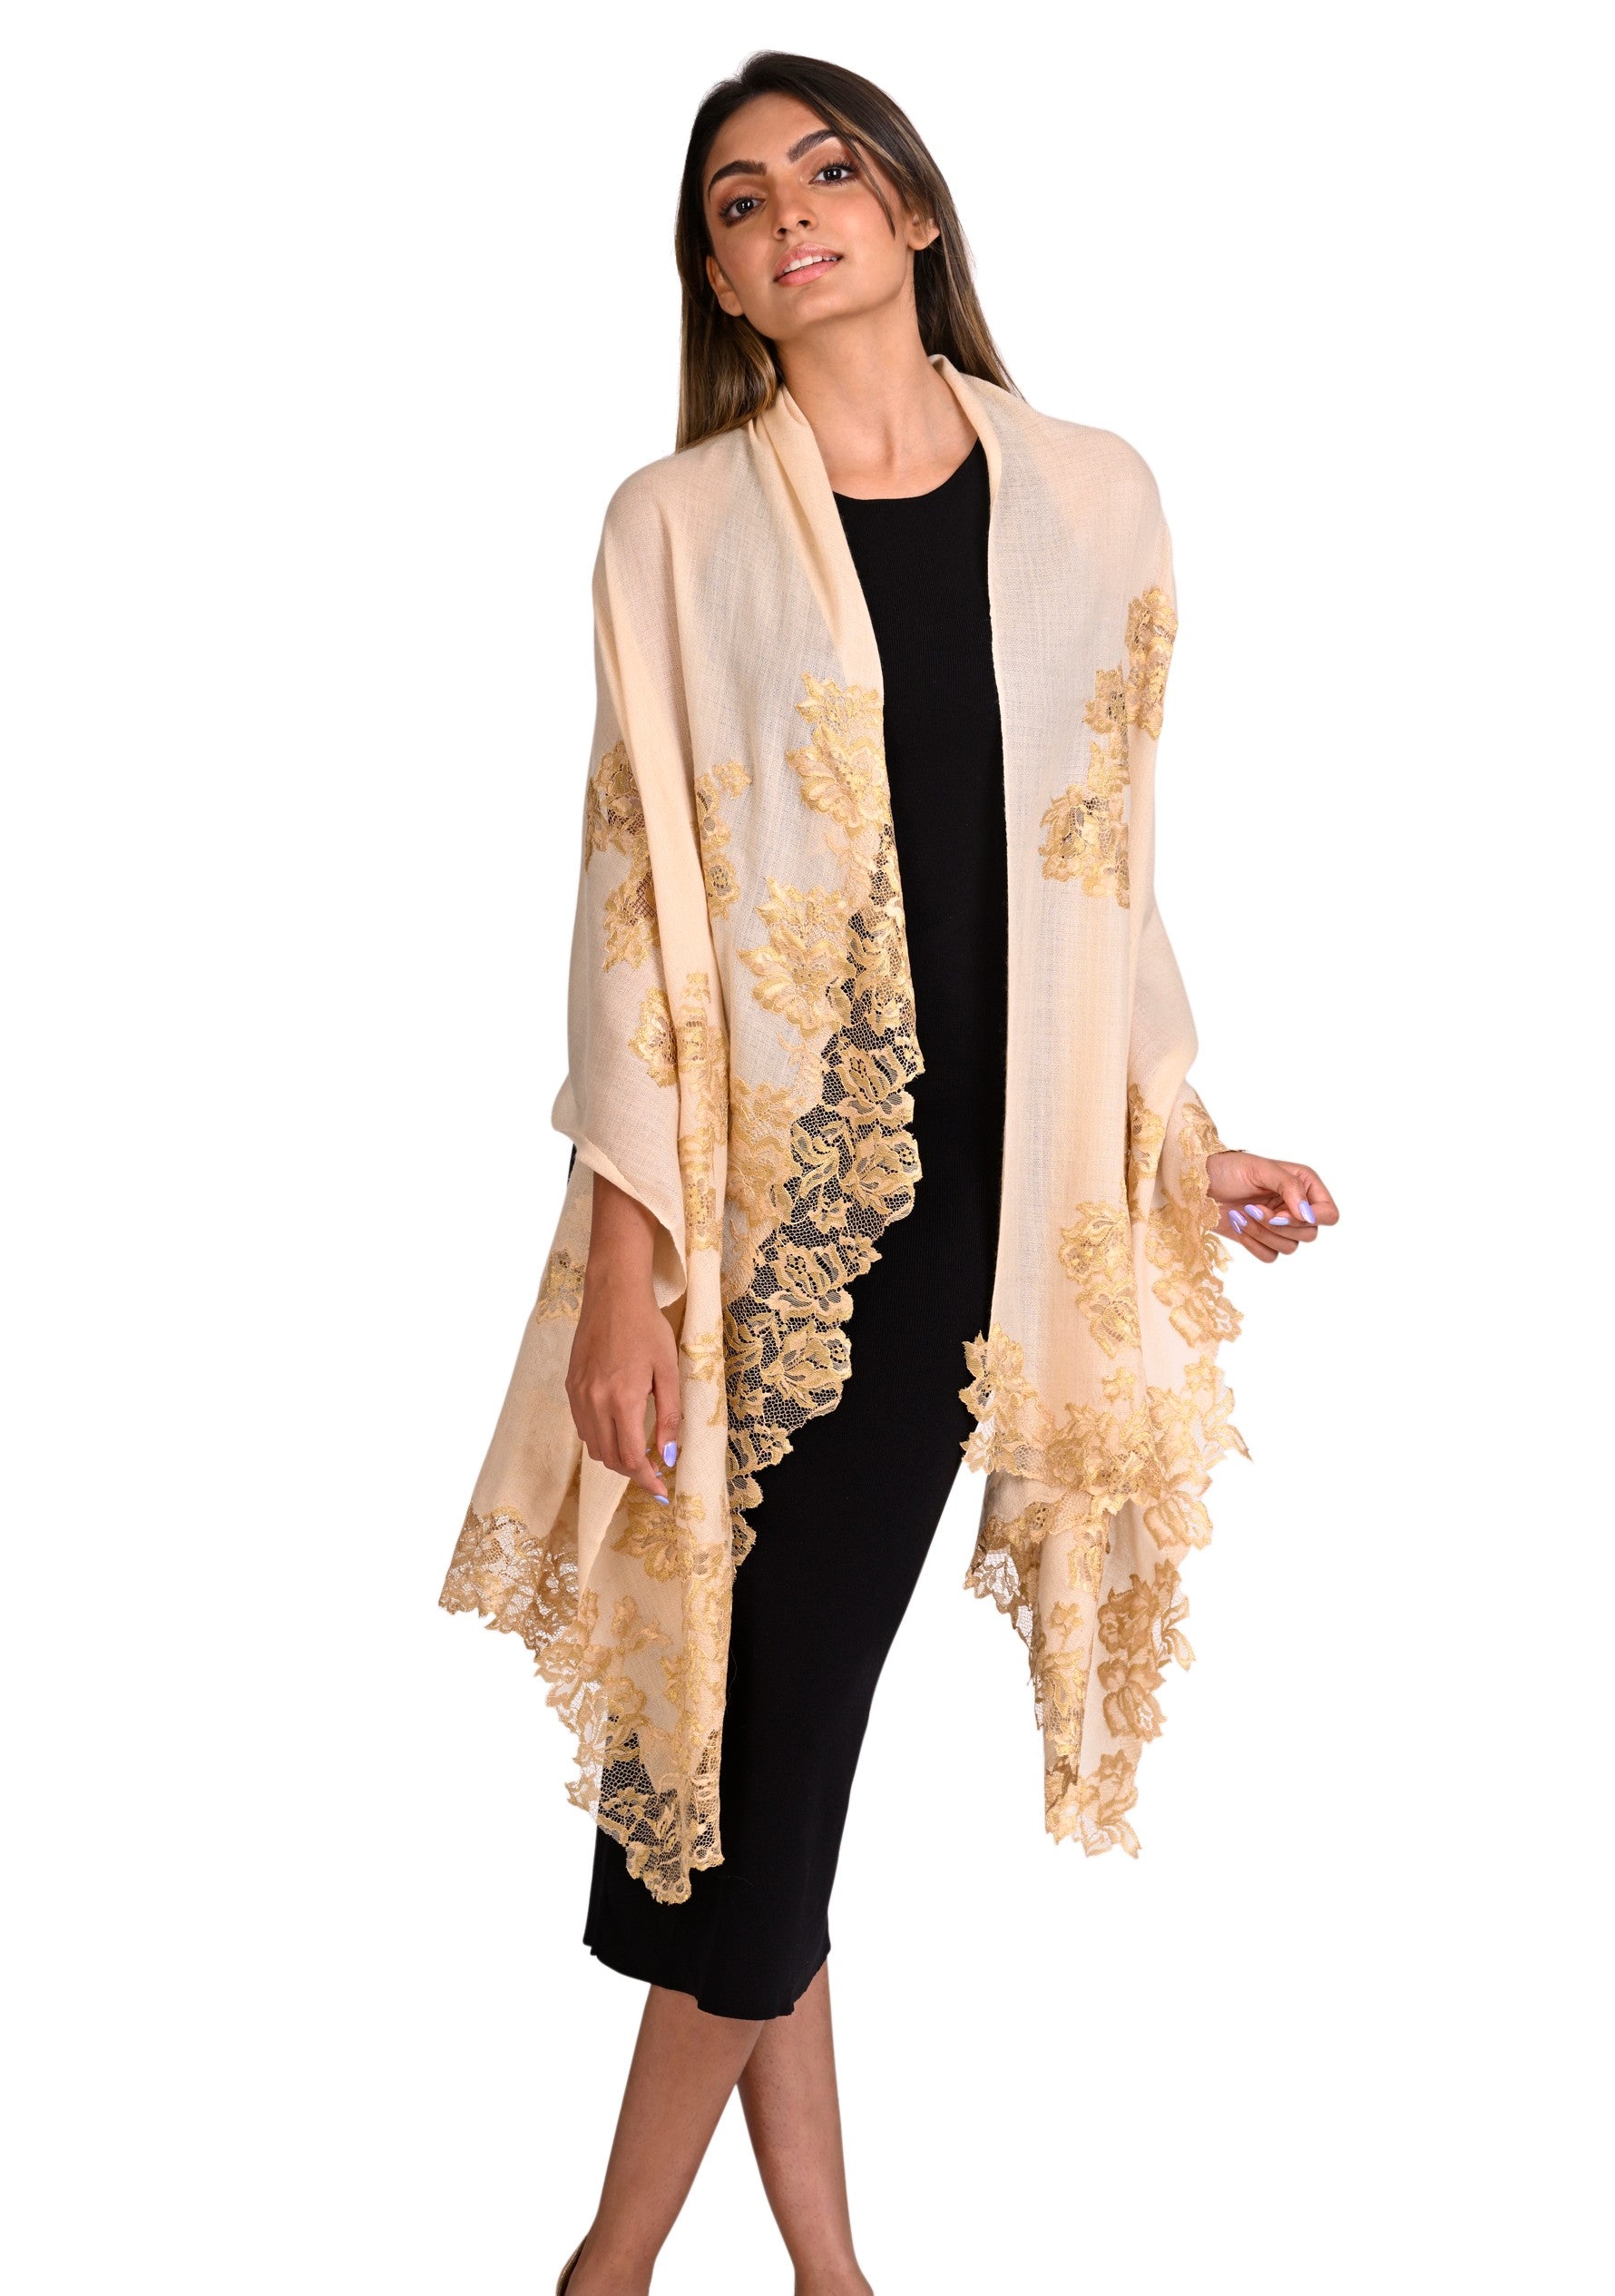 Beige Cashmere Scarf with Gold Chantilly Lace | Maneesha Ruia